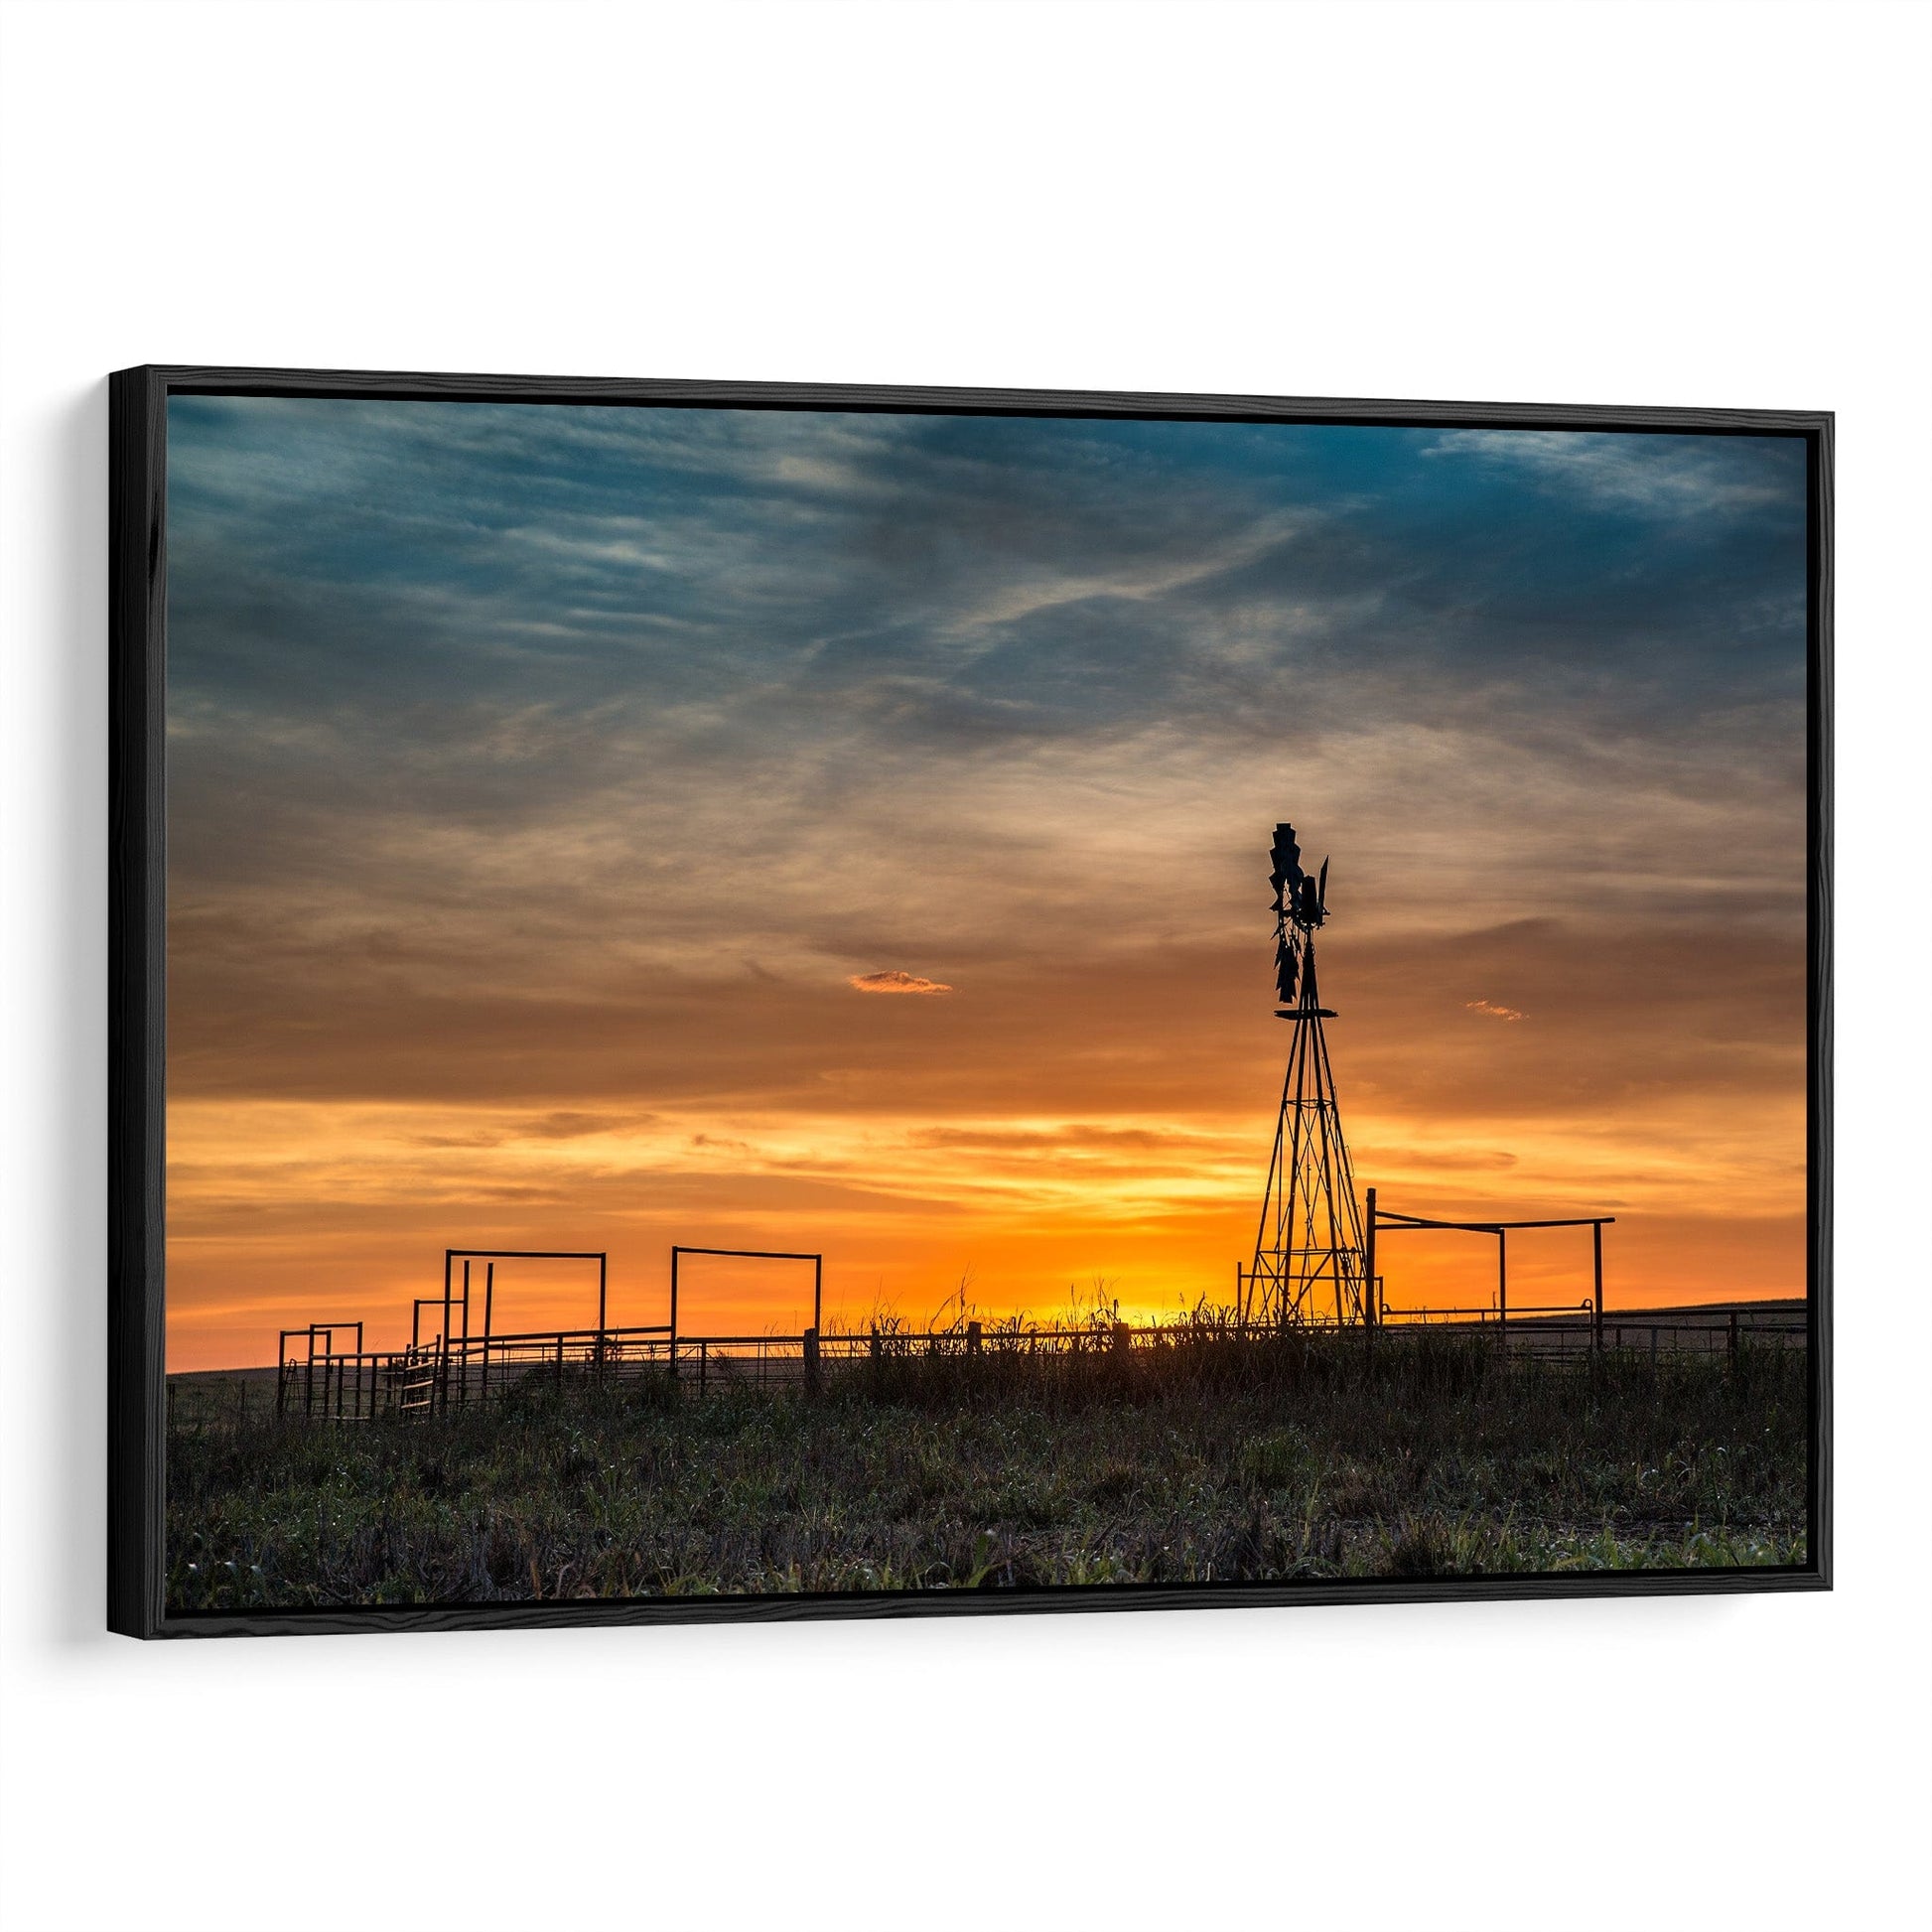 Windmill Photo at Sunset Canvas-Black Frame / 12 x 18 Inches Wall Art Teri James Photography